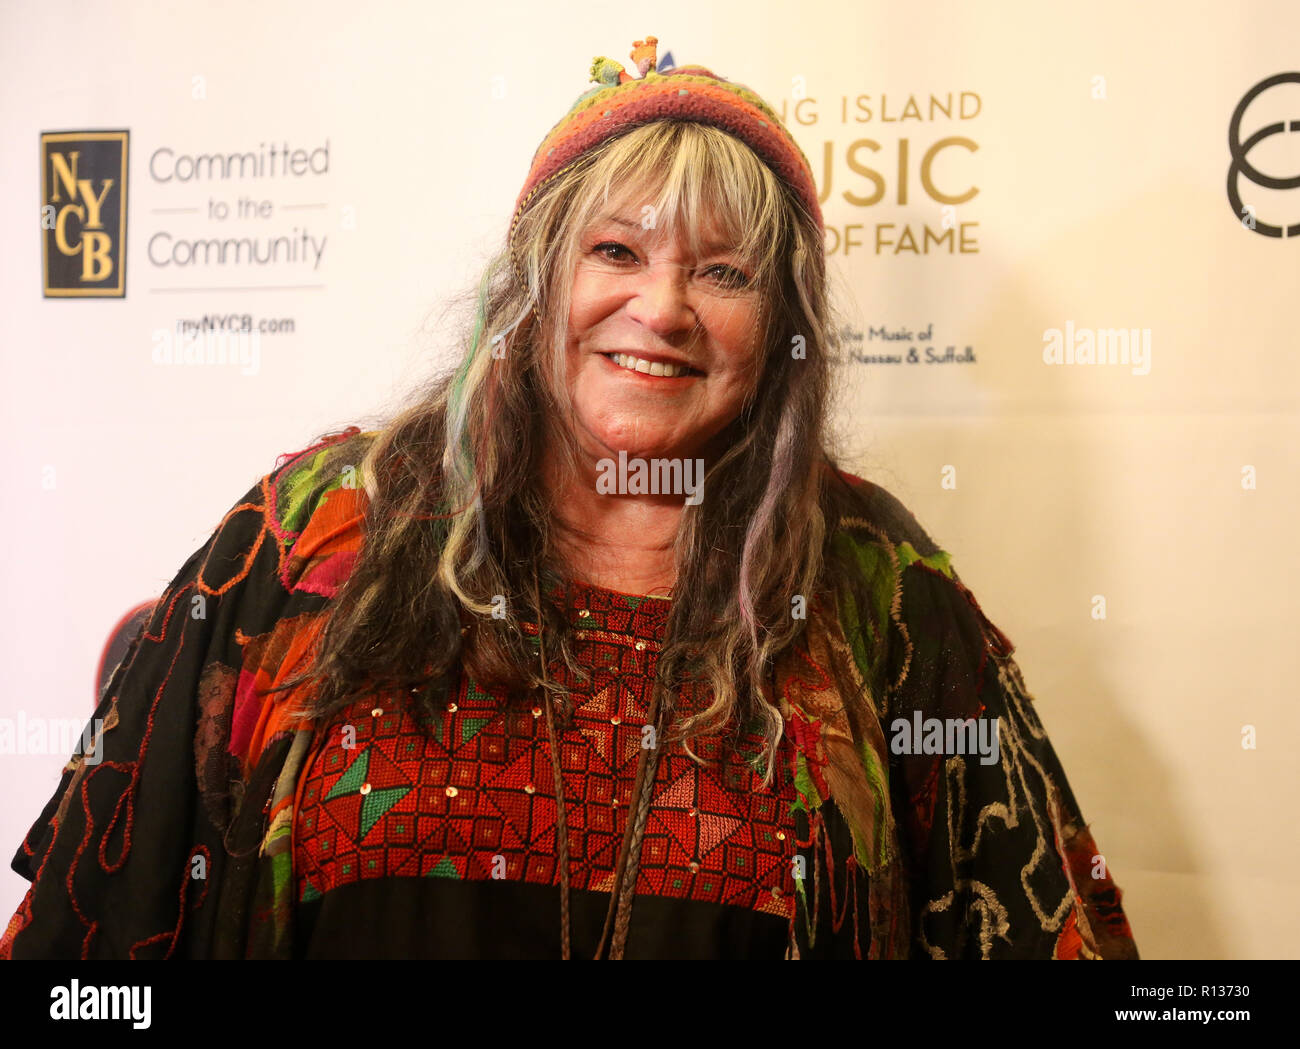 Westbury, United States. 08th Nov, 2018. WESTBURY, NY - NOV 8: Singer Melanie Safka attends the 2018 Long Island Music Hall of Fame induction ceremony at The Space at Westbury on November 8, 2018 in Westbury, New York. Credit: The Photo Access/Alamy Live News Stock Photo